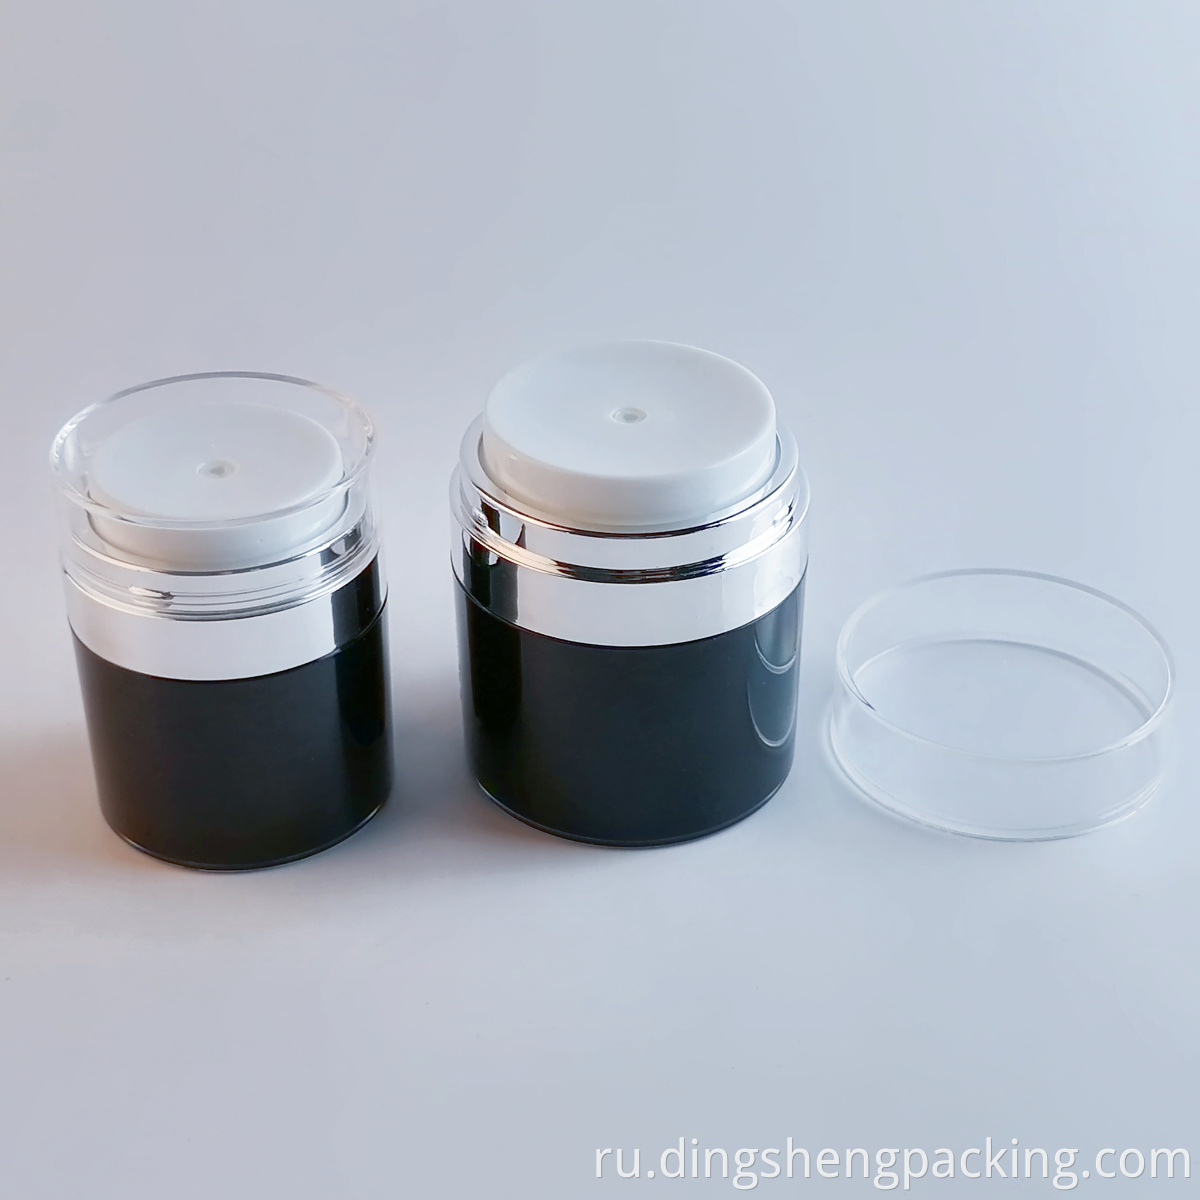 Plastic Cosmetic Container Acrylic Round Airless Pump Face cream jar Bottle